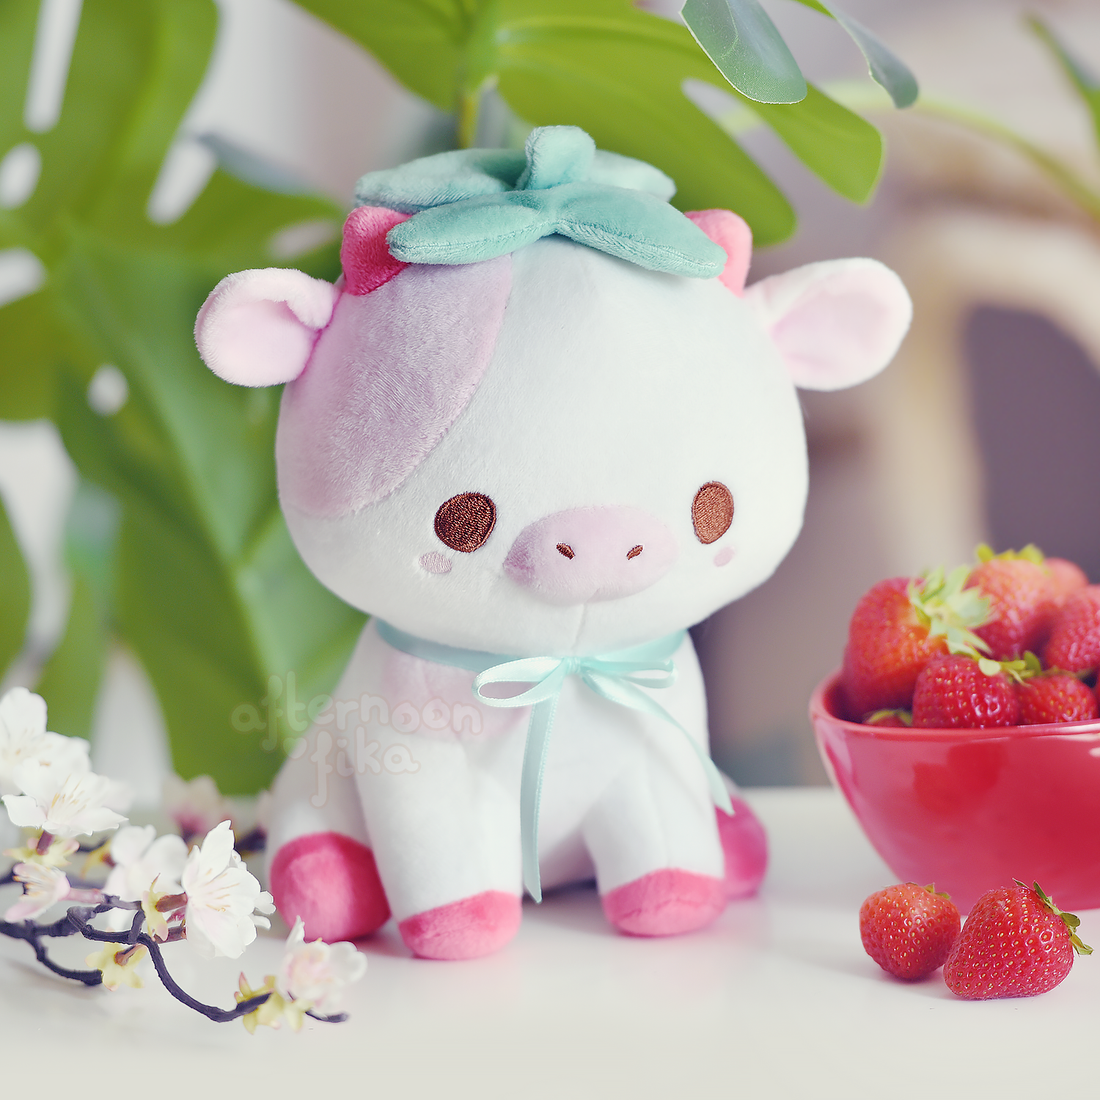 Sherry The Strawberry Cow Plush